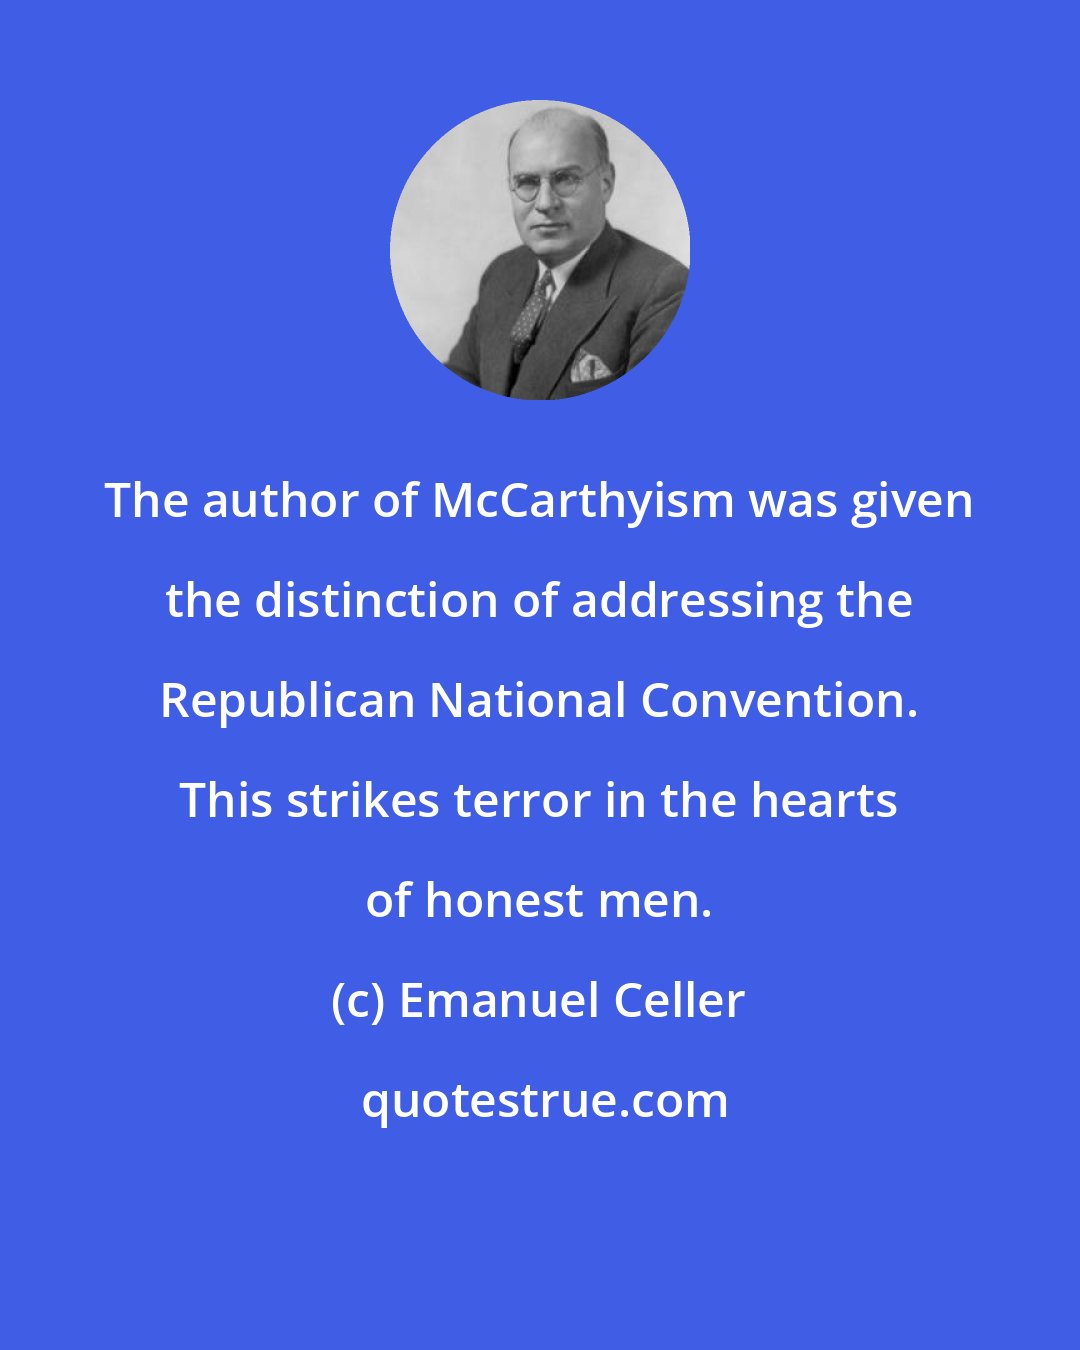 Emanuel Celler: The author of McCarthyism was given the distinction of addressing the Republican National Convention. This strikes terror in the hearts of honest men.